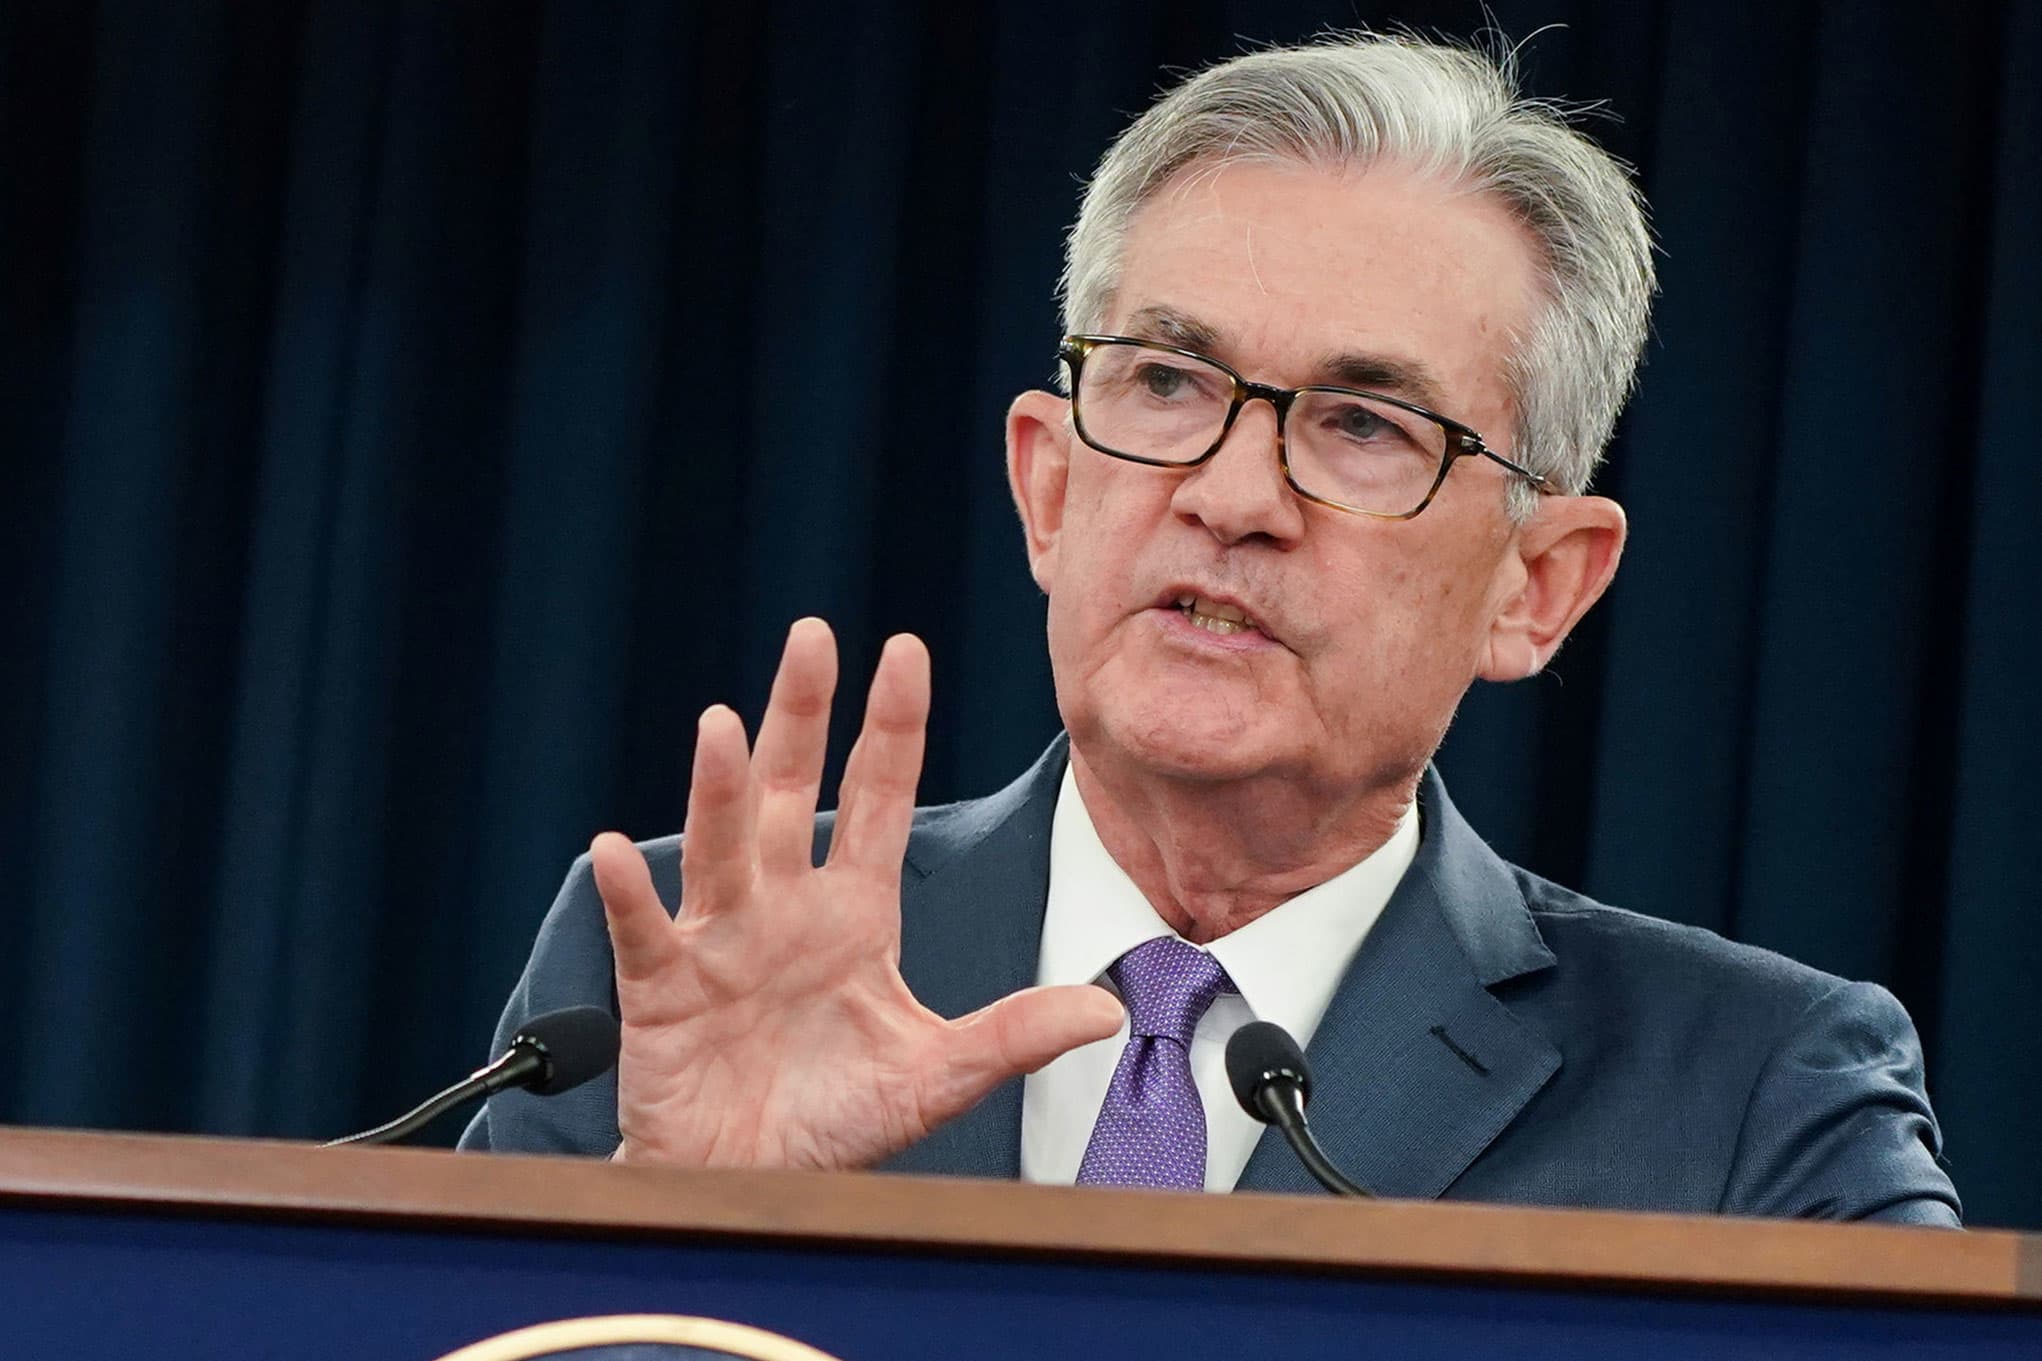 Cryptocurrency is not a valuable store, says Fed’s Powell